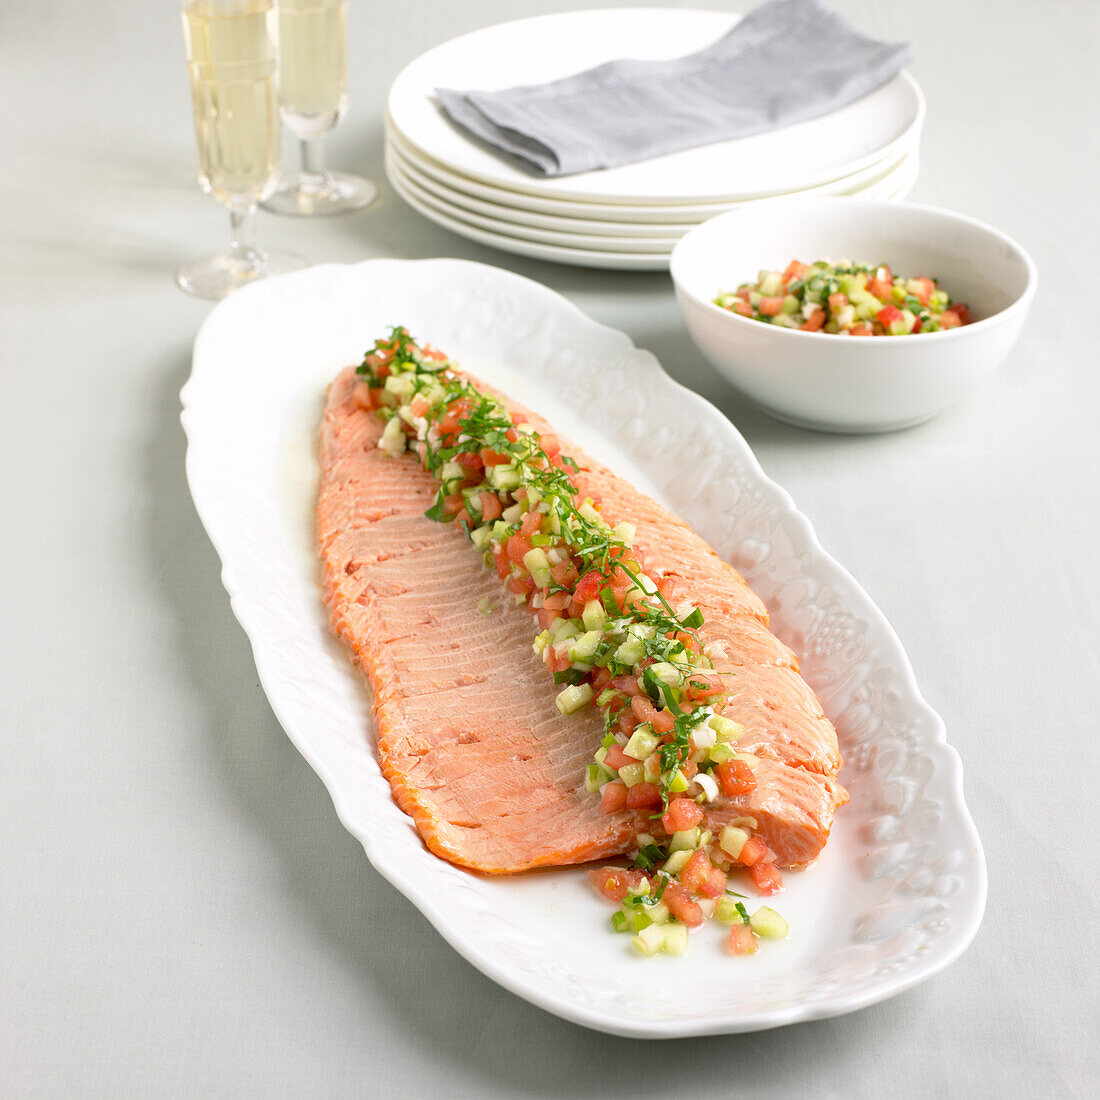 Hot baked trout with tomato and basil salsa